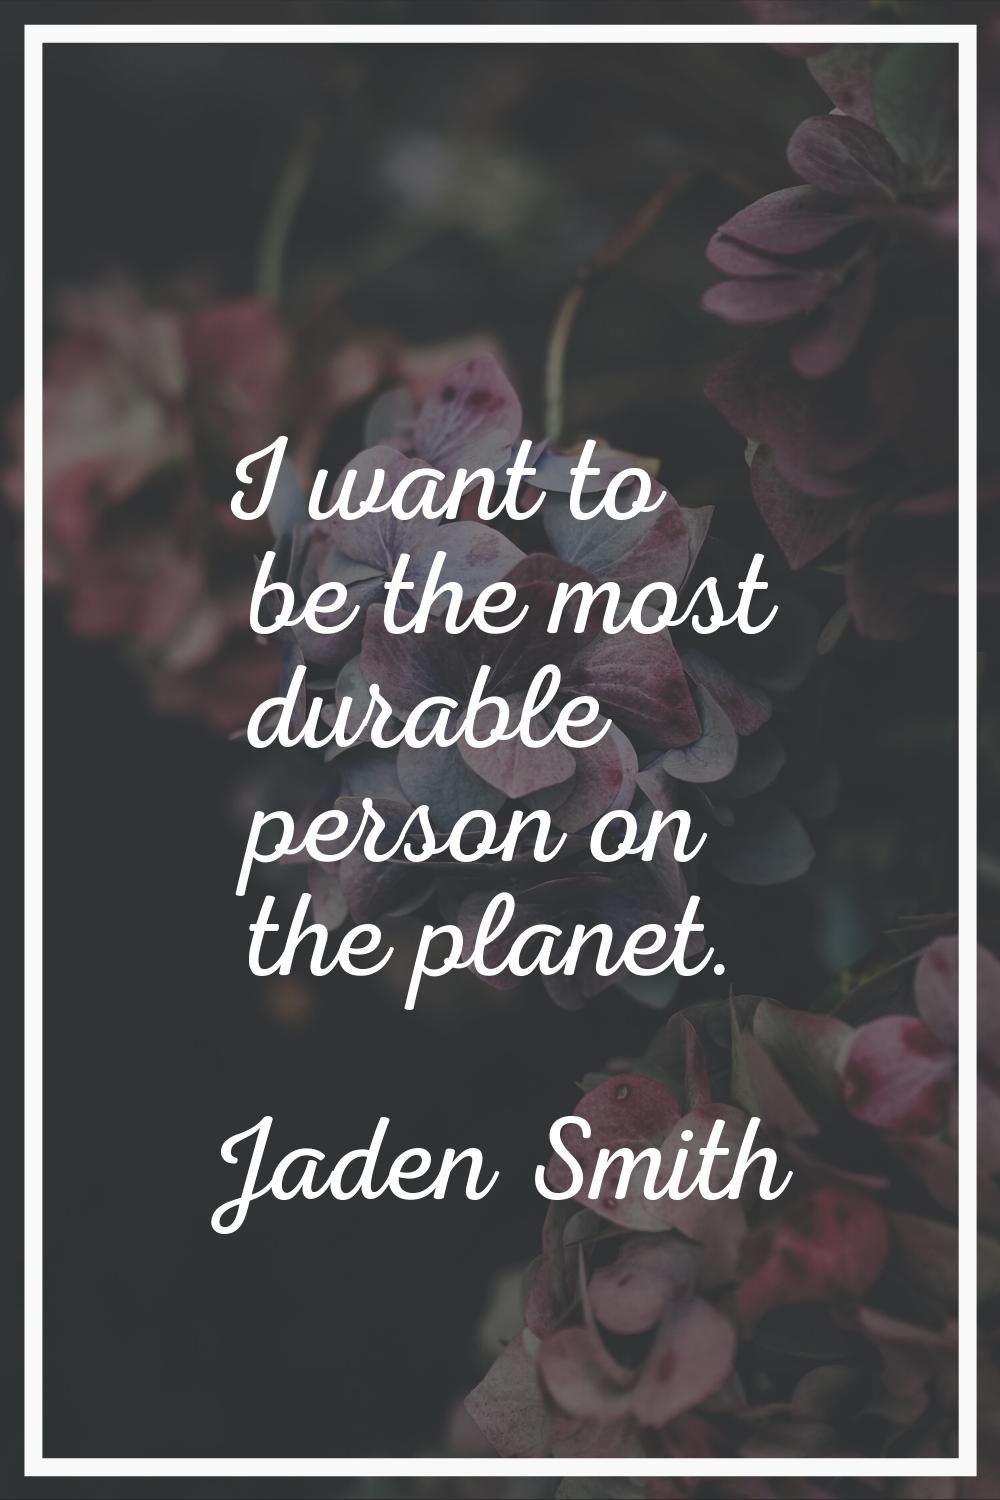 I want to be the most durable person on the planet.